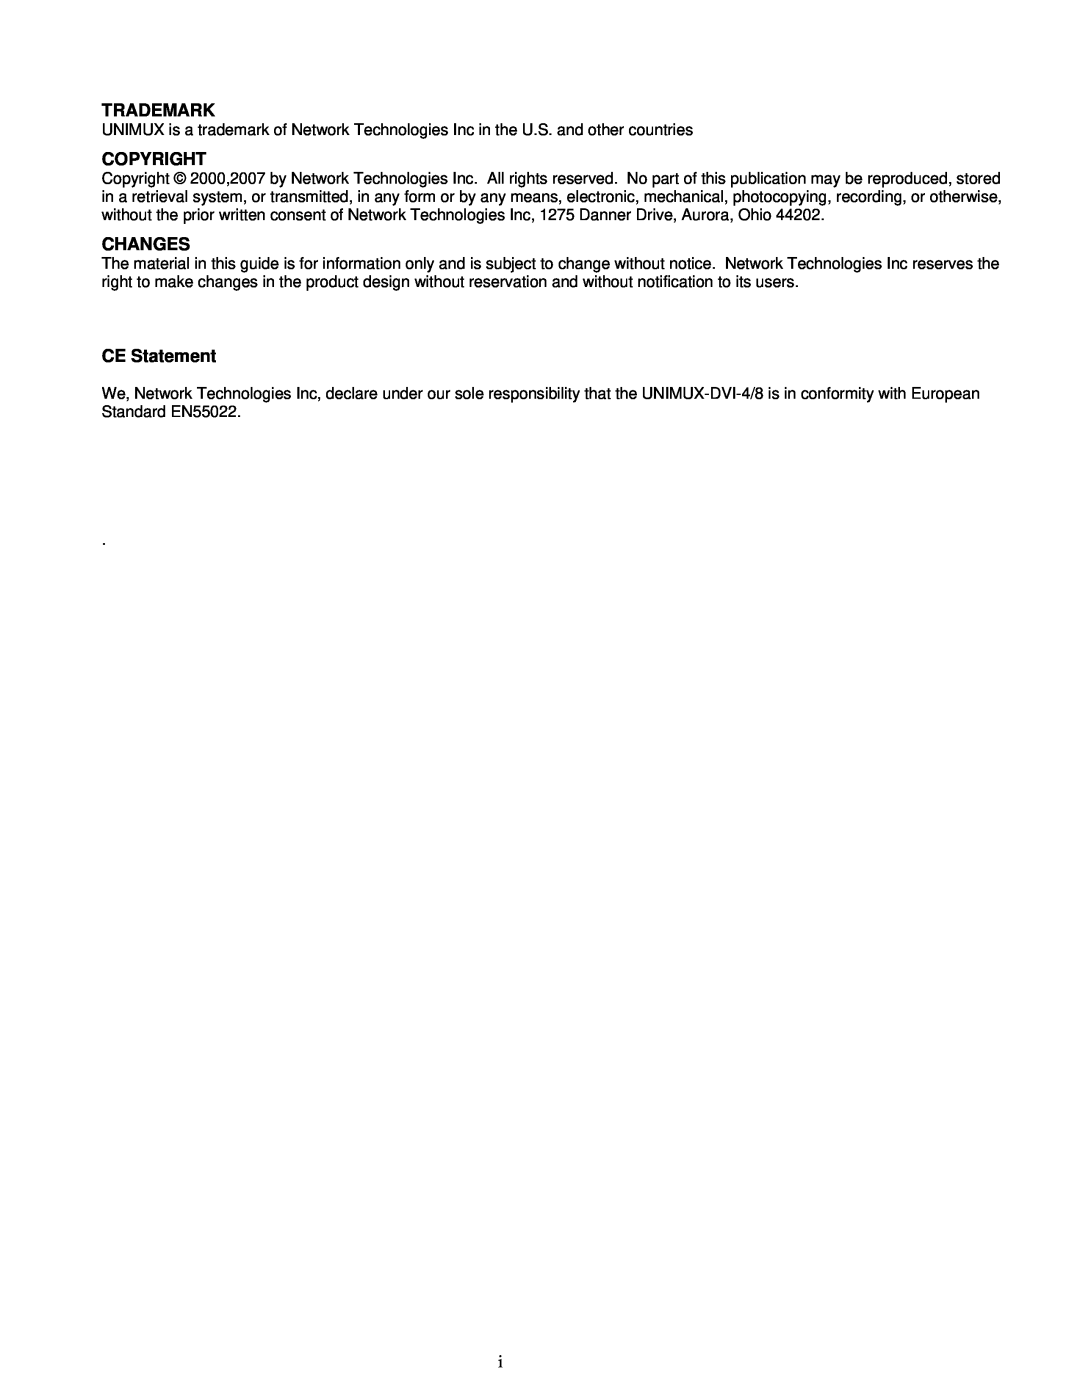 Network Technologies DVI-x operation manual Trademark, Copyright, Changes, CE Statement 